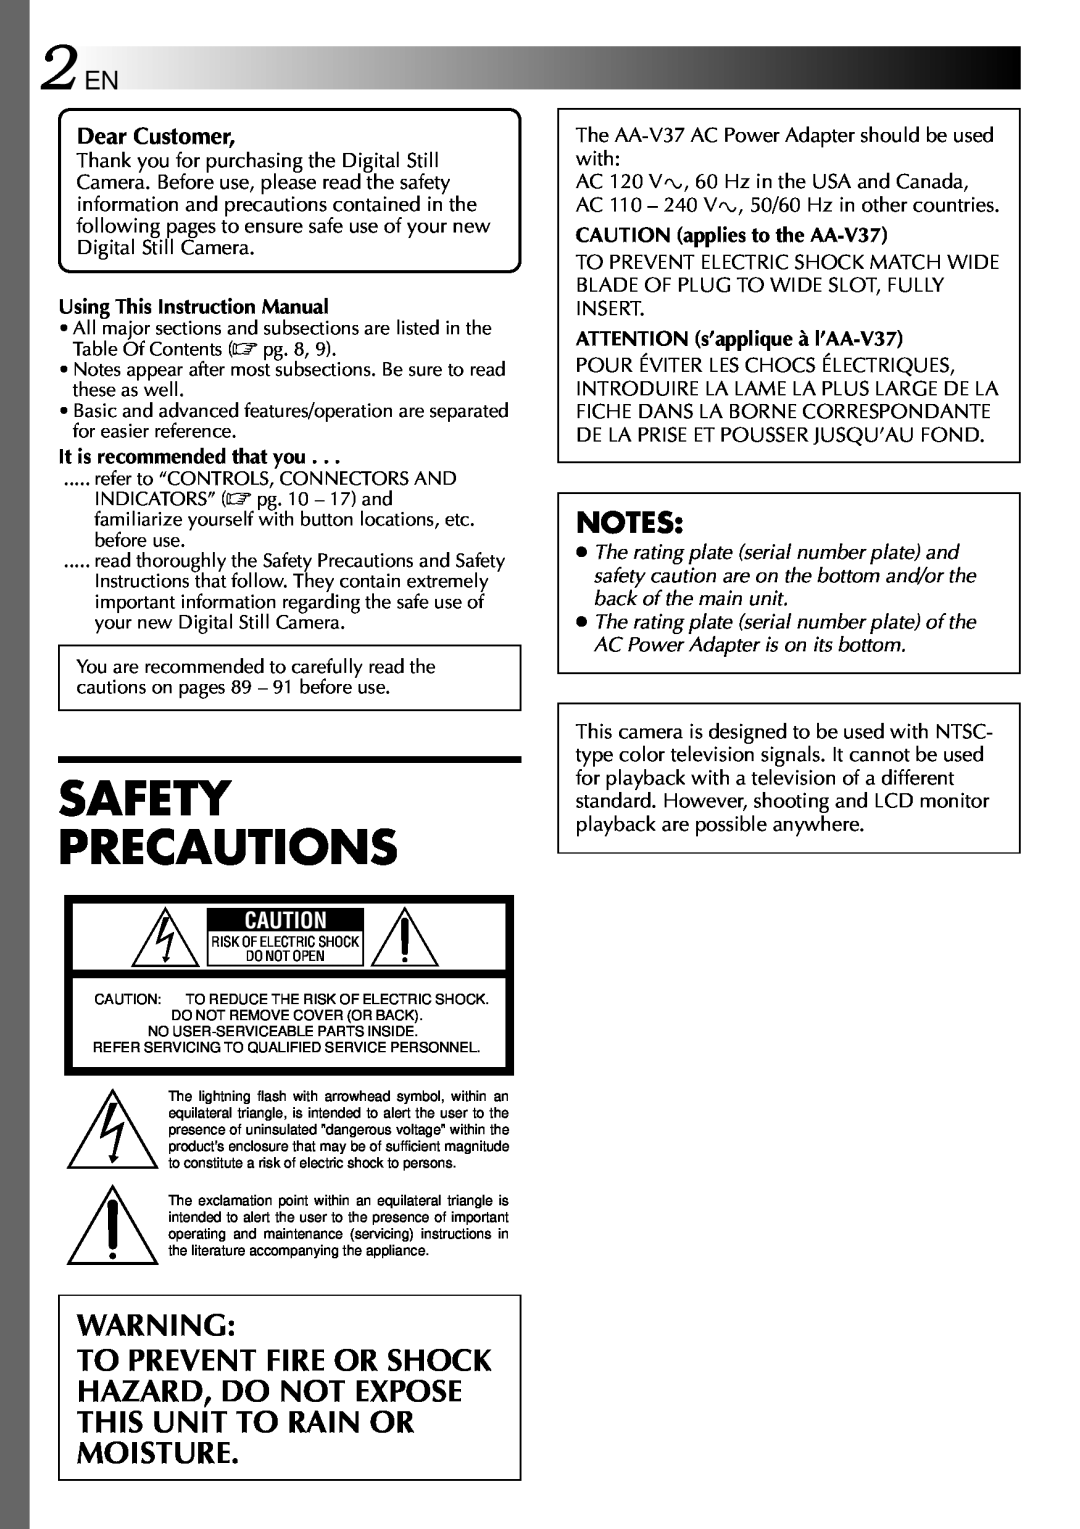 JVC GC-QX3 Safety Precautions, Using This Instruction Manual, It is recommended that you, CAUTION applies to the AA-V37 